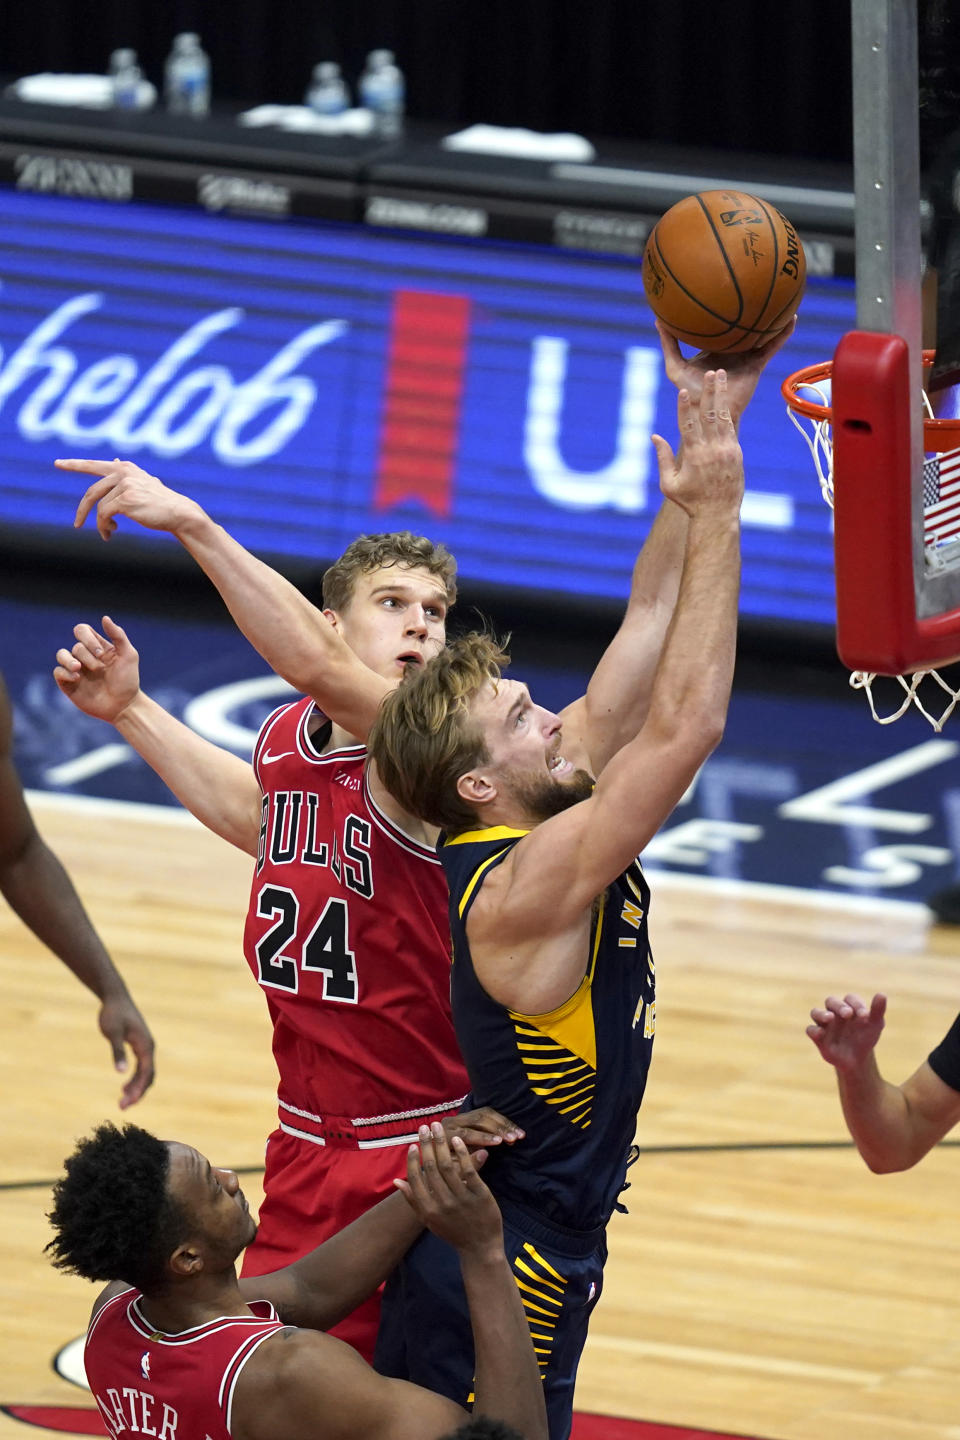 Indiana Pacers' Domantas Sabonis, right, scores past Chicago Bulls' Lauri Markkanen during the second half of an NBA basketball game Saturday, Dec. 26, 2020, in Chicago. (AP Photo/Charles Rex Arbogast)